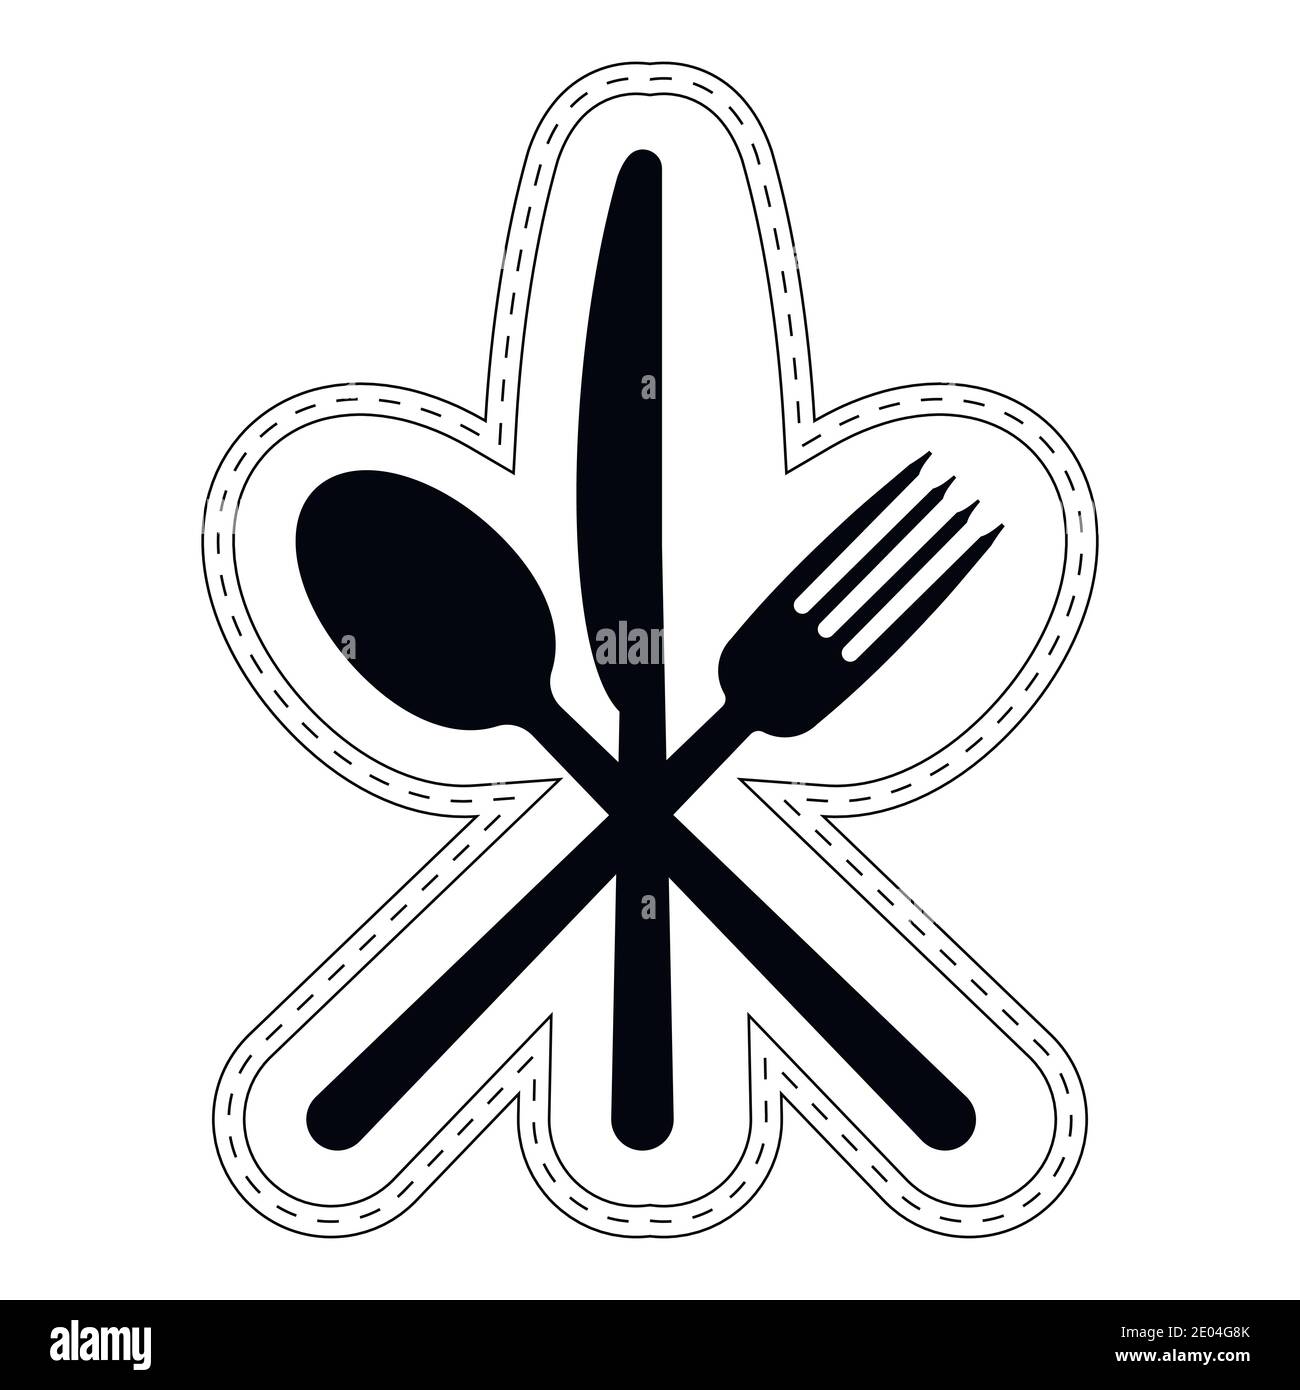 icon Cutlery restaurant catering, vector icon crossed spoon fork knife, logo sign sticker fast food knife spoon with stroke Stock Vector